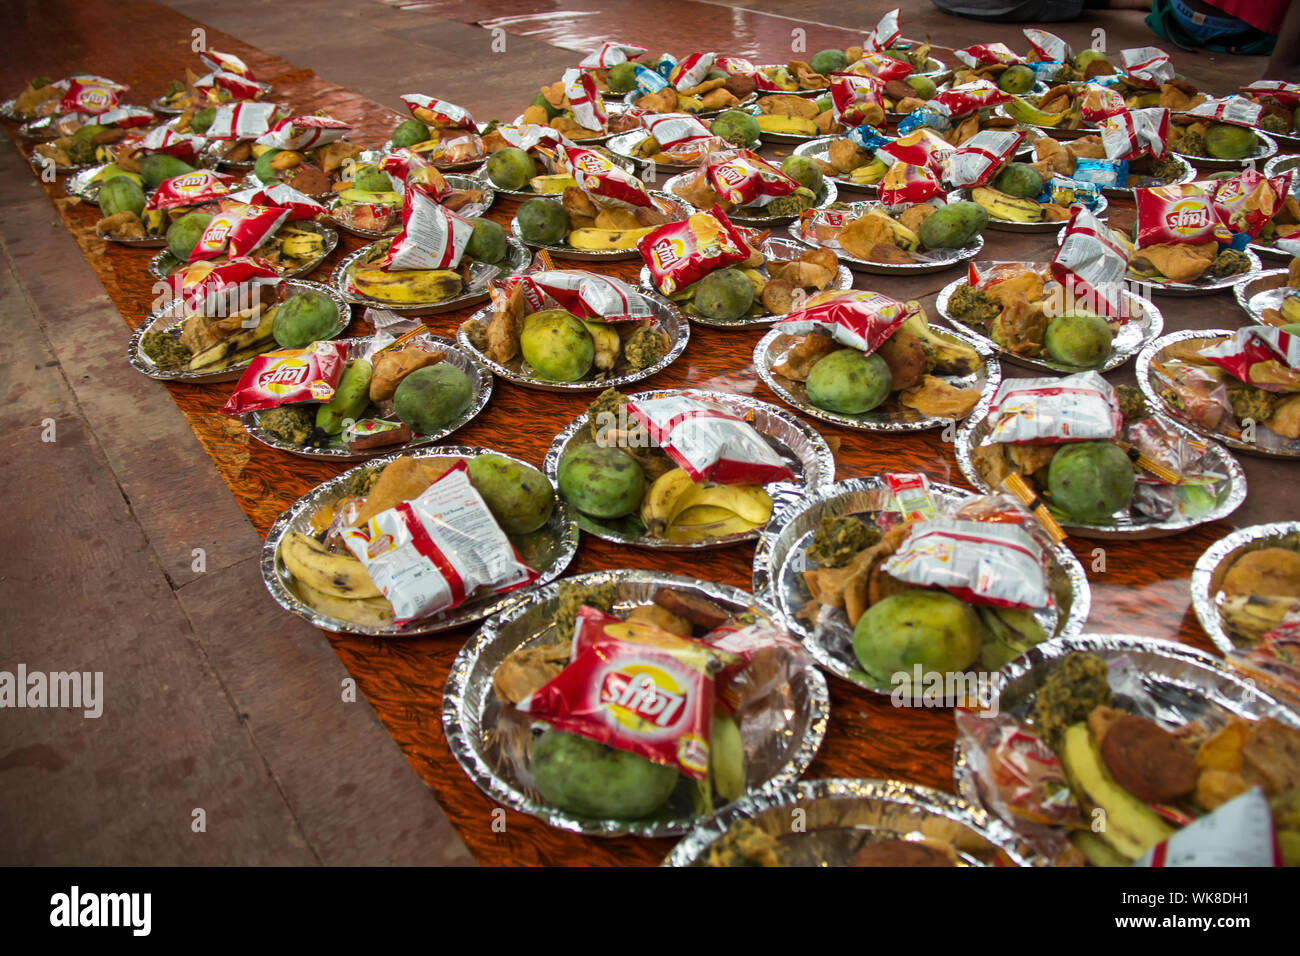 Plates of food arranged for Iftar at a mosque, Jama Masjid, Old Delhi